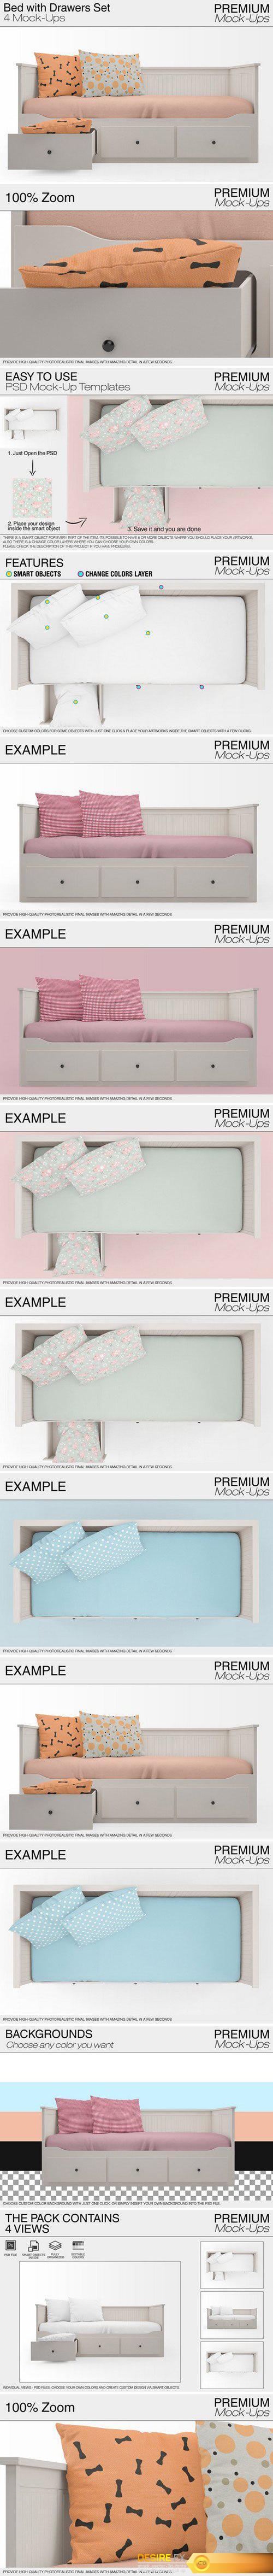 CM - Bed with Drawers Mockup Pack 2043092